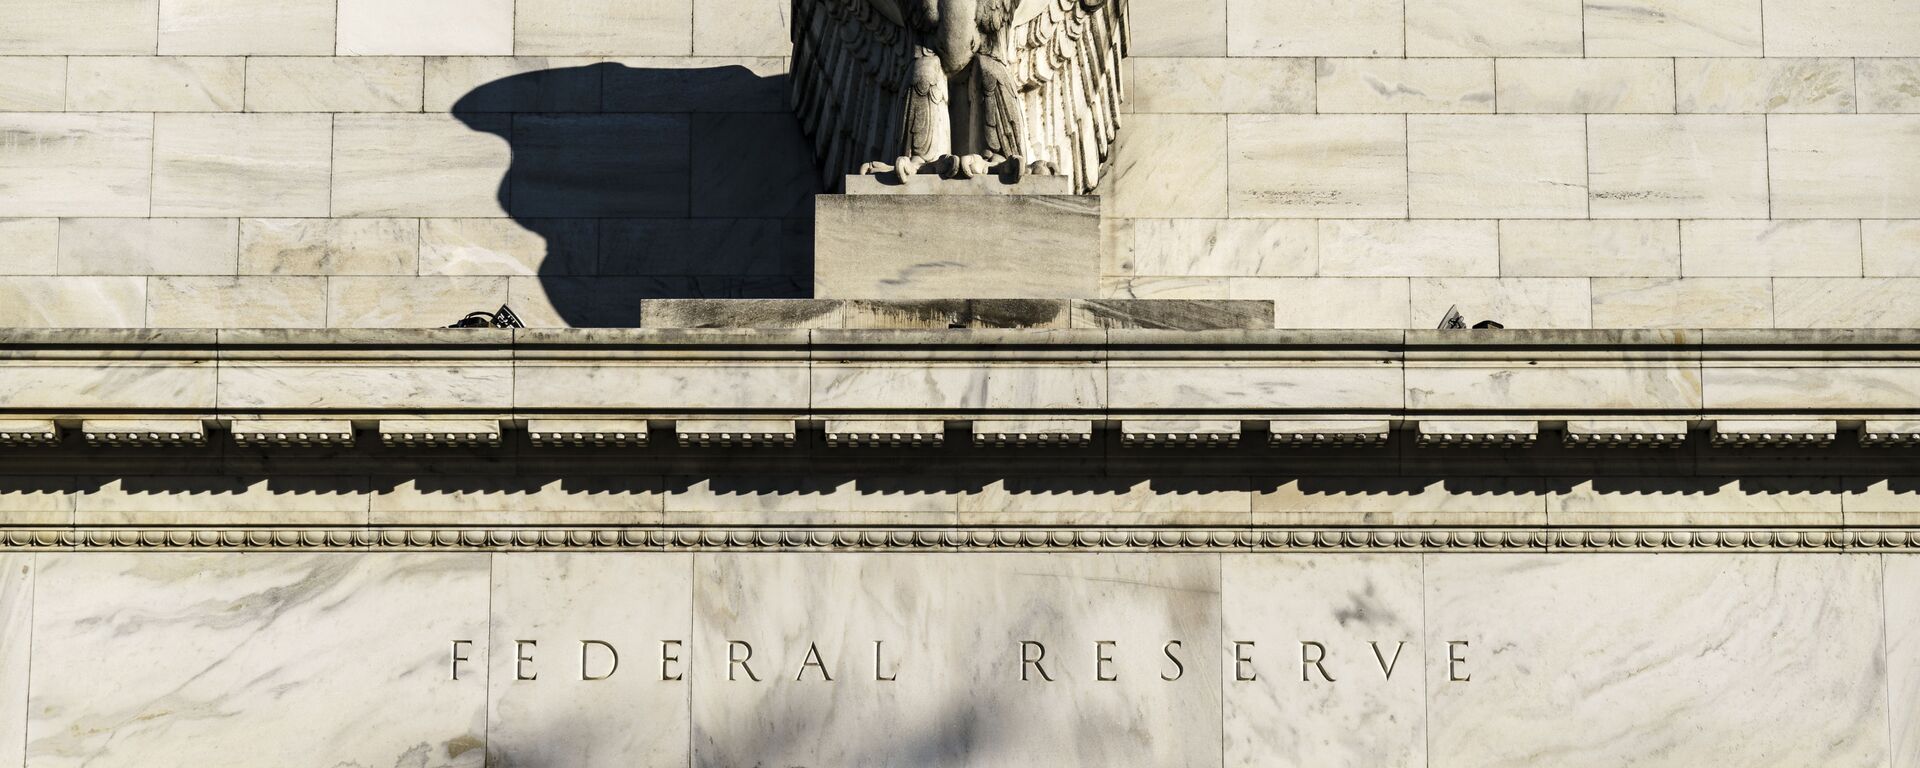 The Federal Reserve is seen in Washington, Monday, Nov. 16, 2020. President Donald Trump's unorthodox choice for the Federal Reserve Board of Governors, Judy Shelton, could be approved by the Senate this week, according to Majority Leader Mitch McConnell's office. - Sputnik International, 1920, 14.10.2022